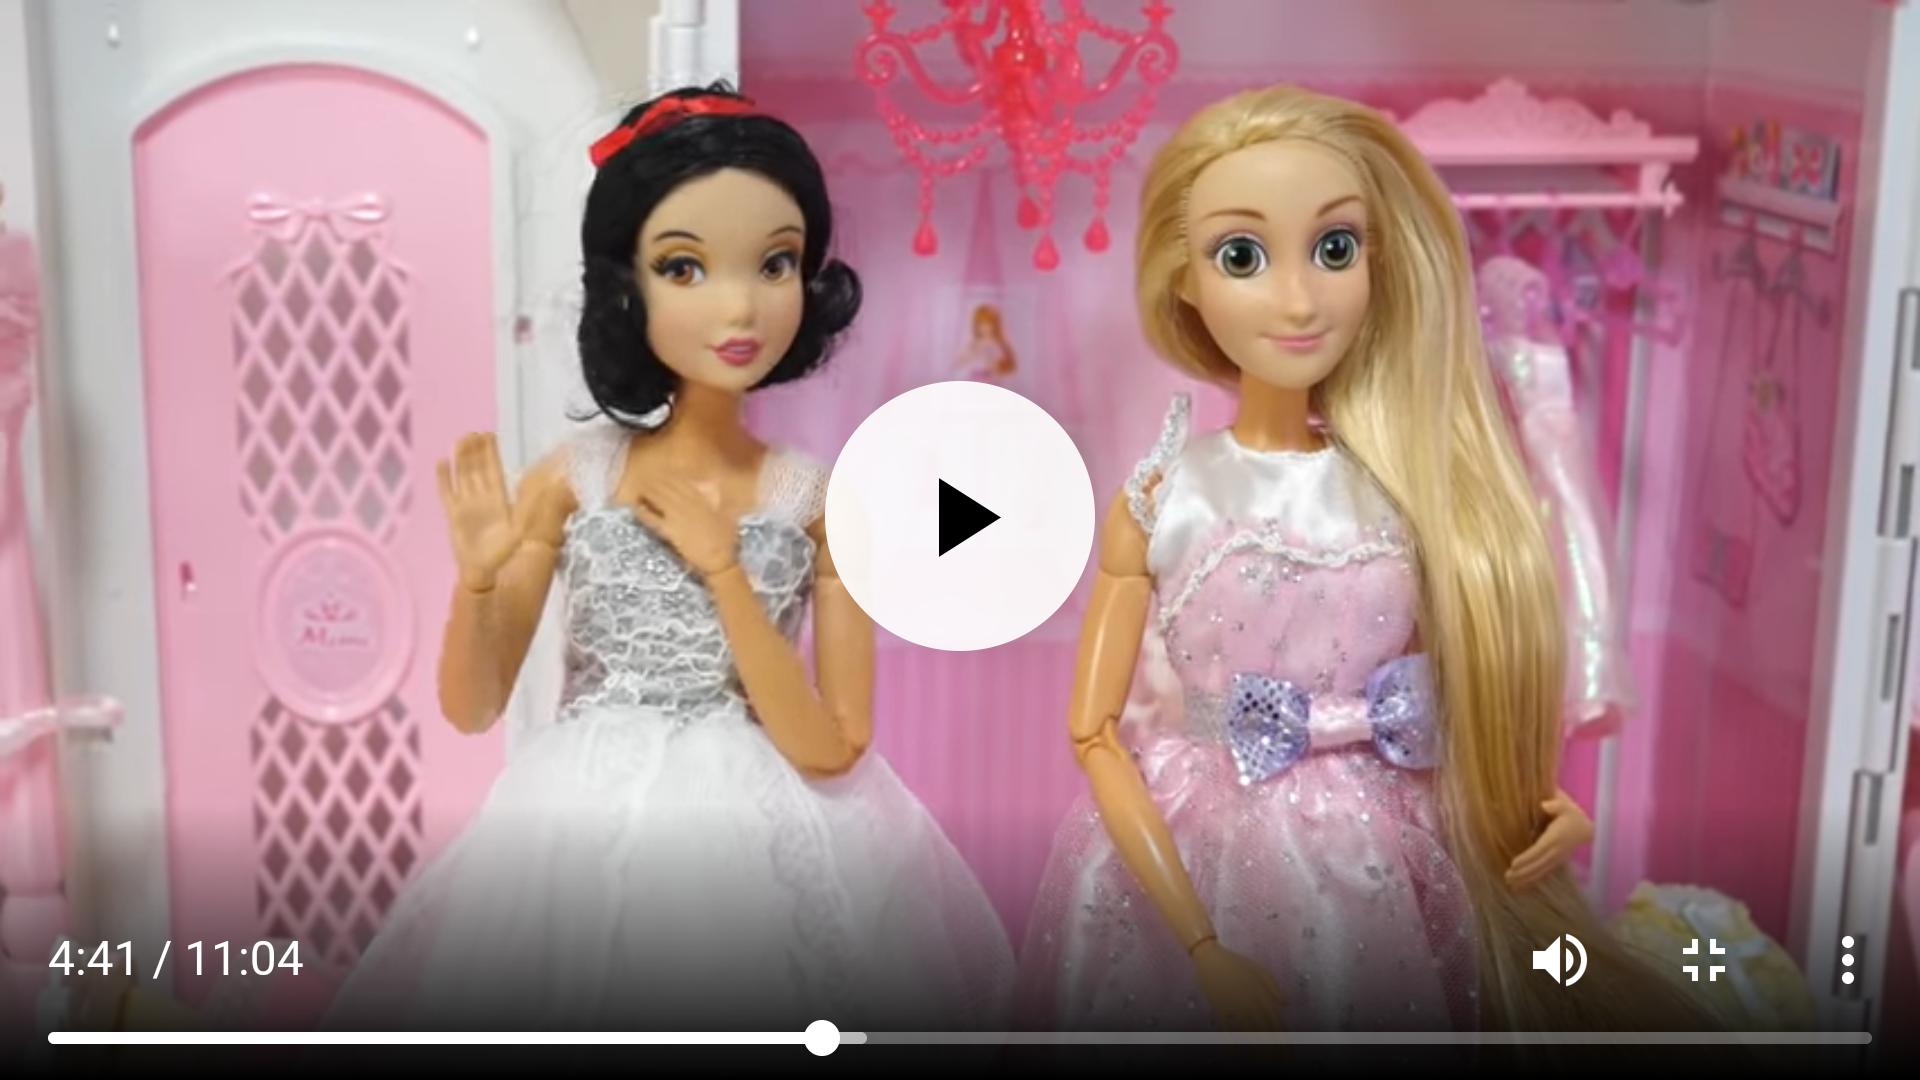 Princess Barbie Doll Videos for Android - APK Download